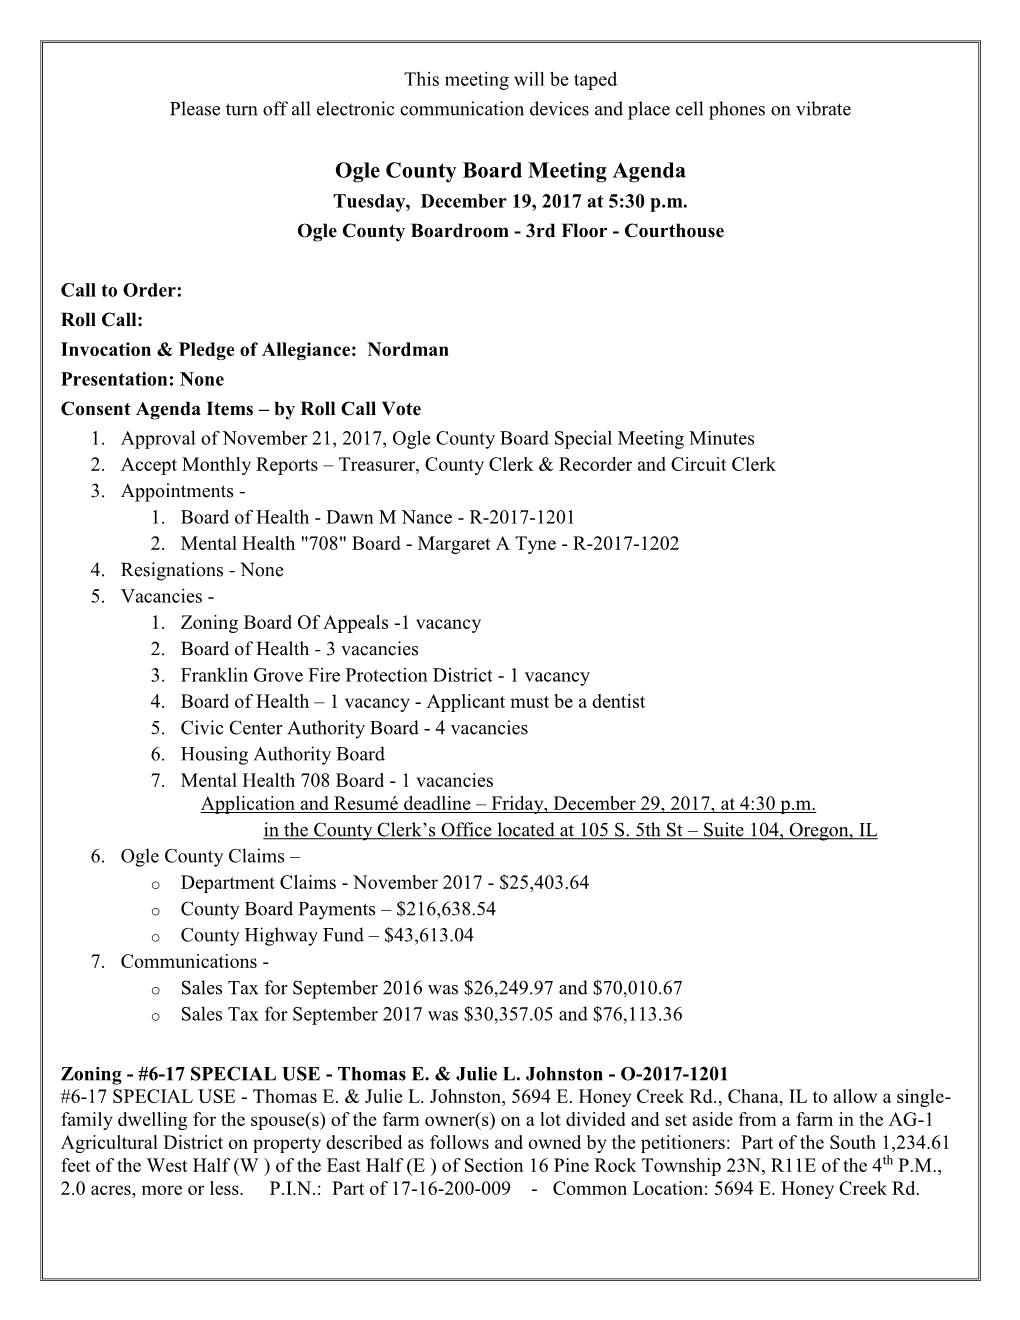 Ogle County Board Meeting Agenda Tuesday, December 19, 2017 at 5:30 P.M